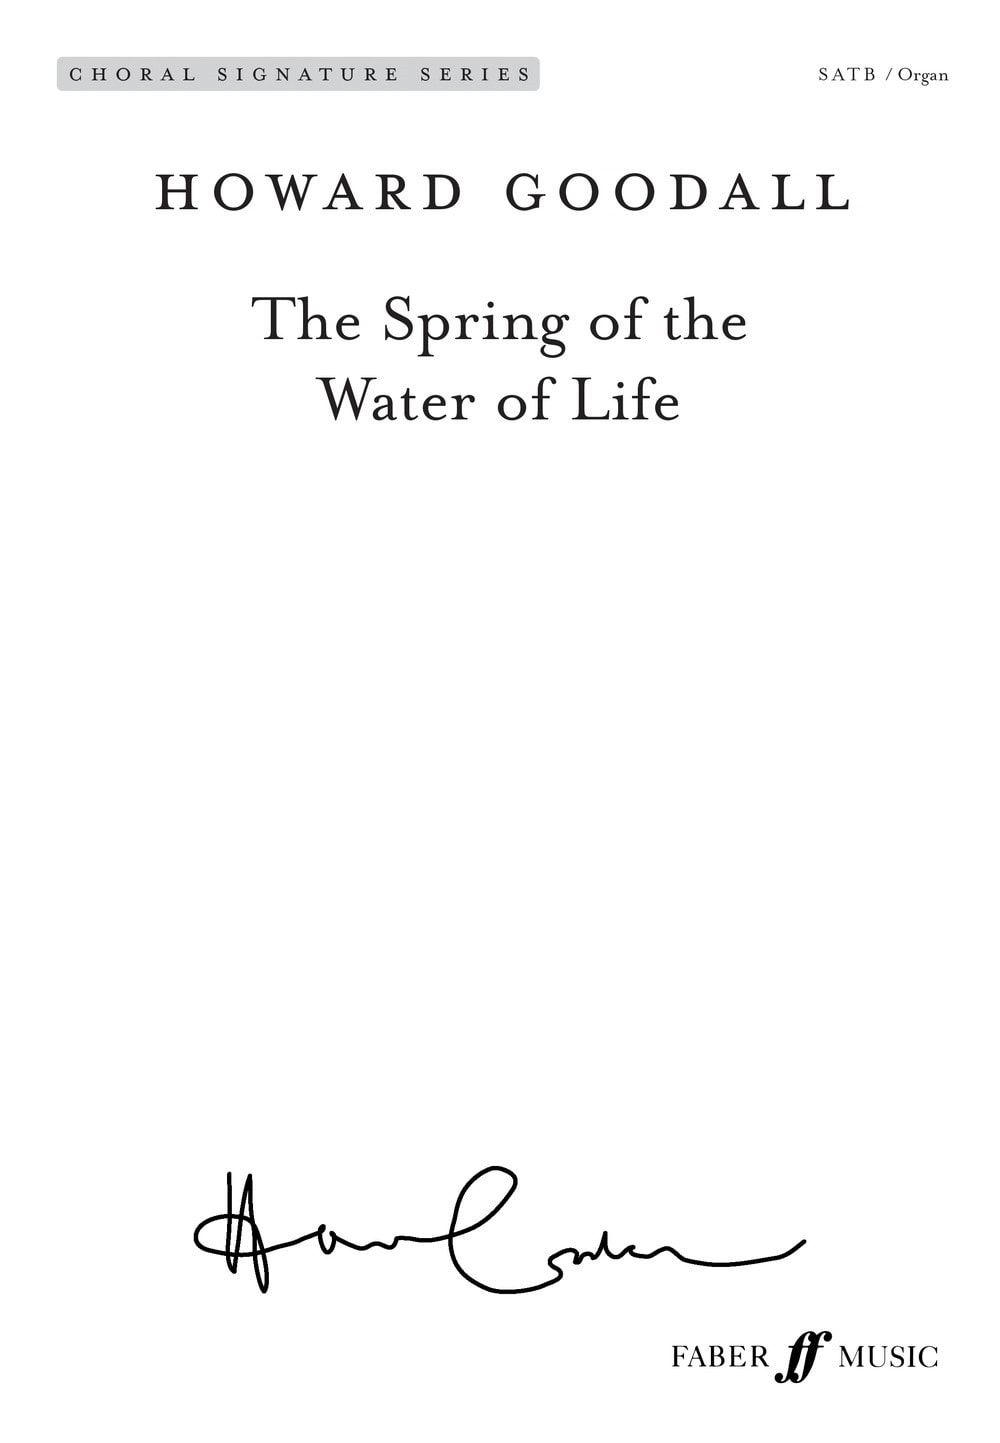 Goodall: The Spring of the Water of Life SATB published by Faber